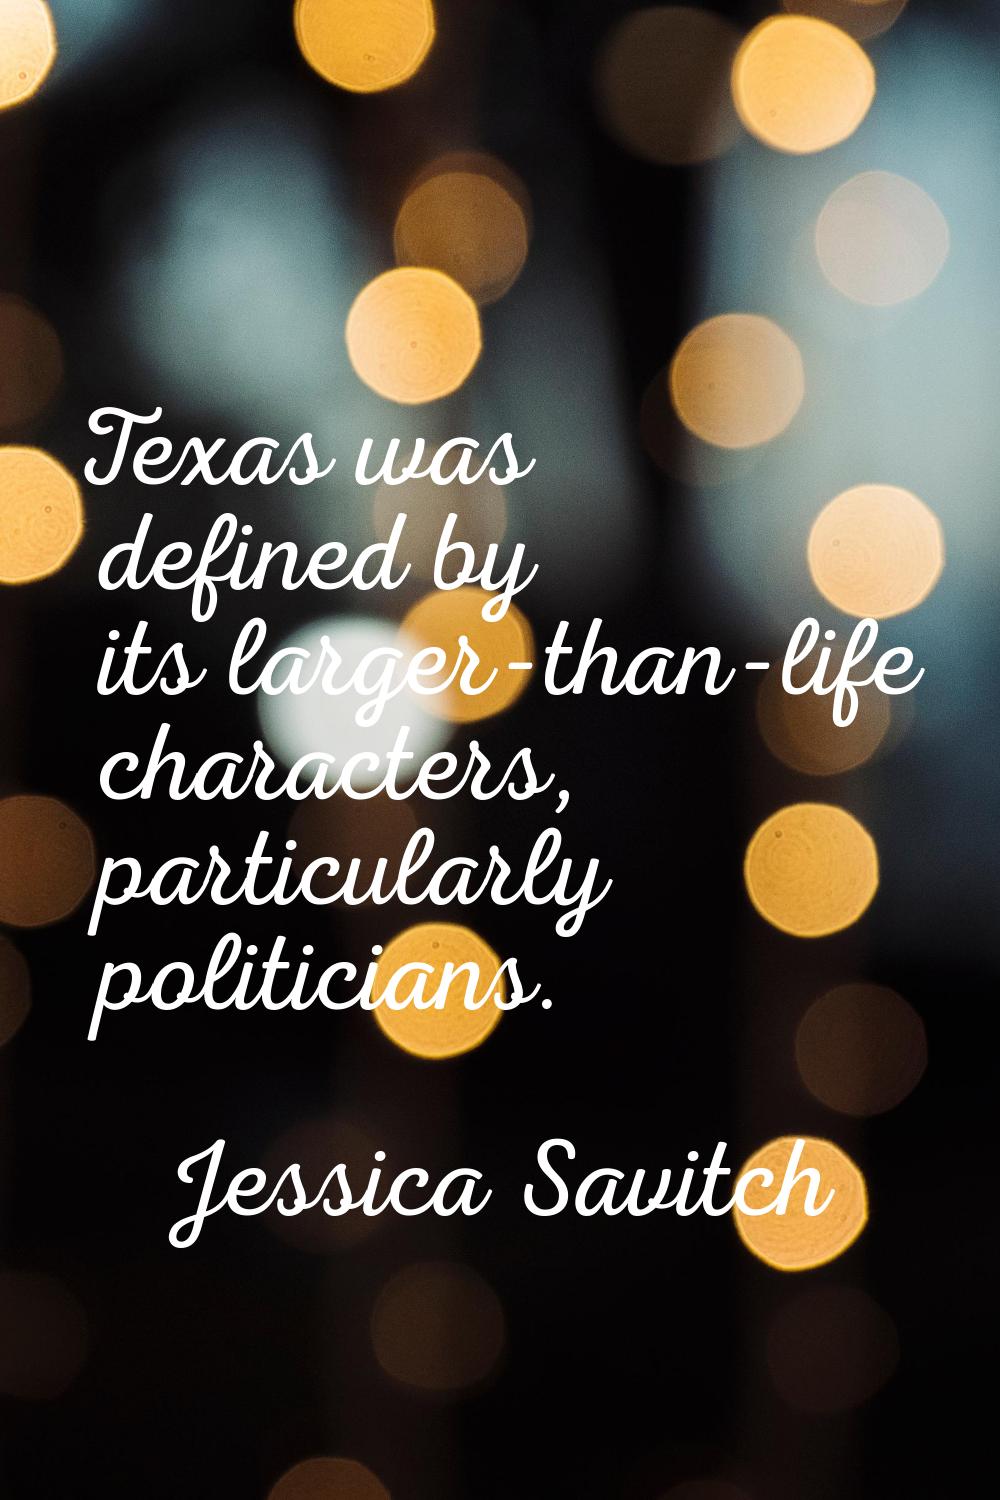 Texas was defined by its larger-than-life characters, particularly politicians.